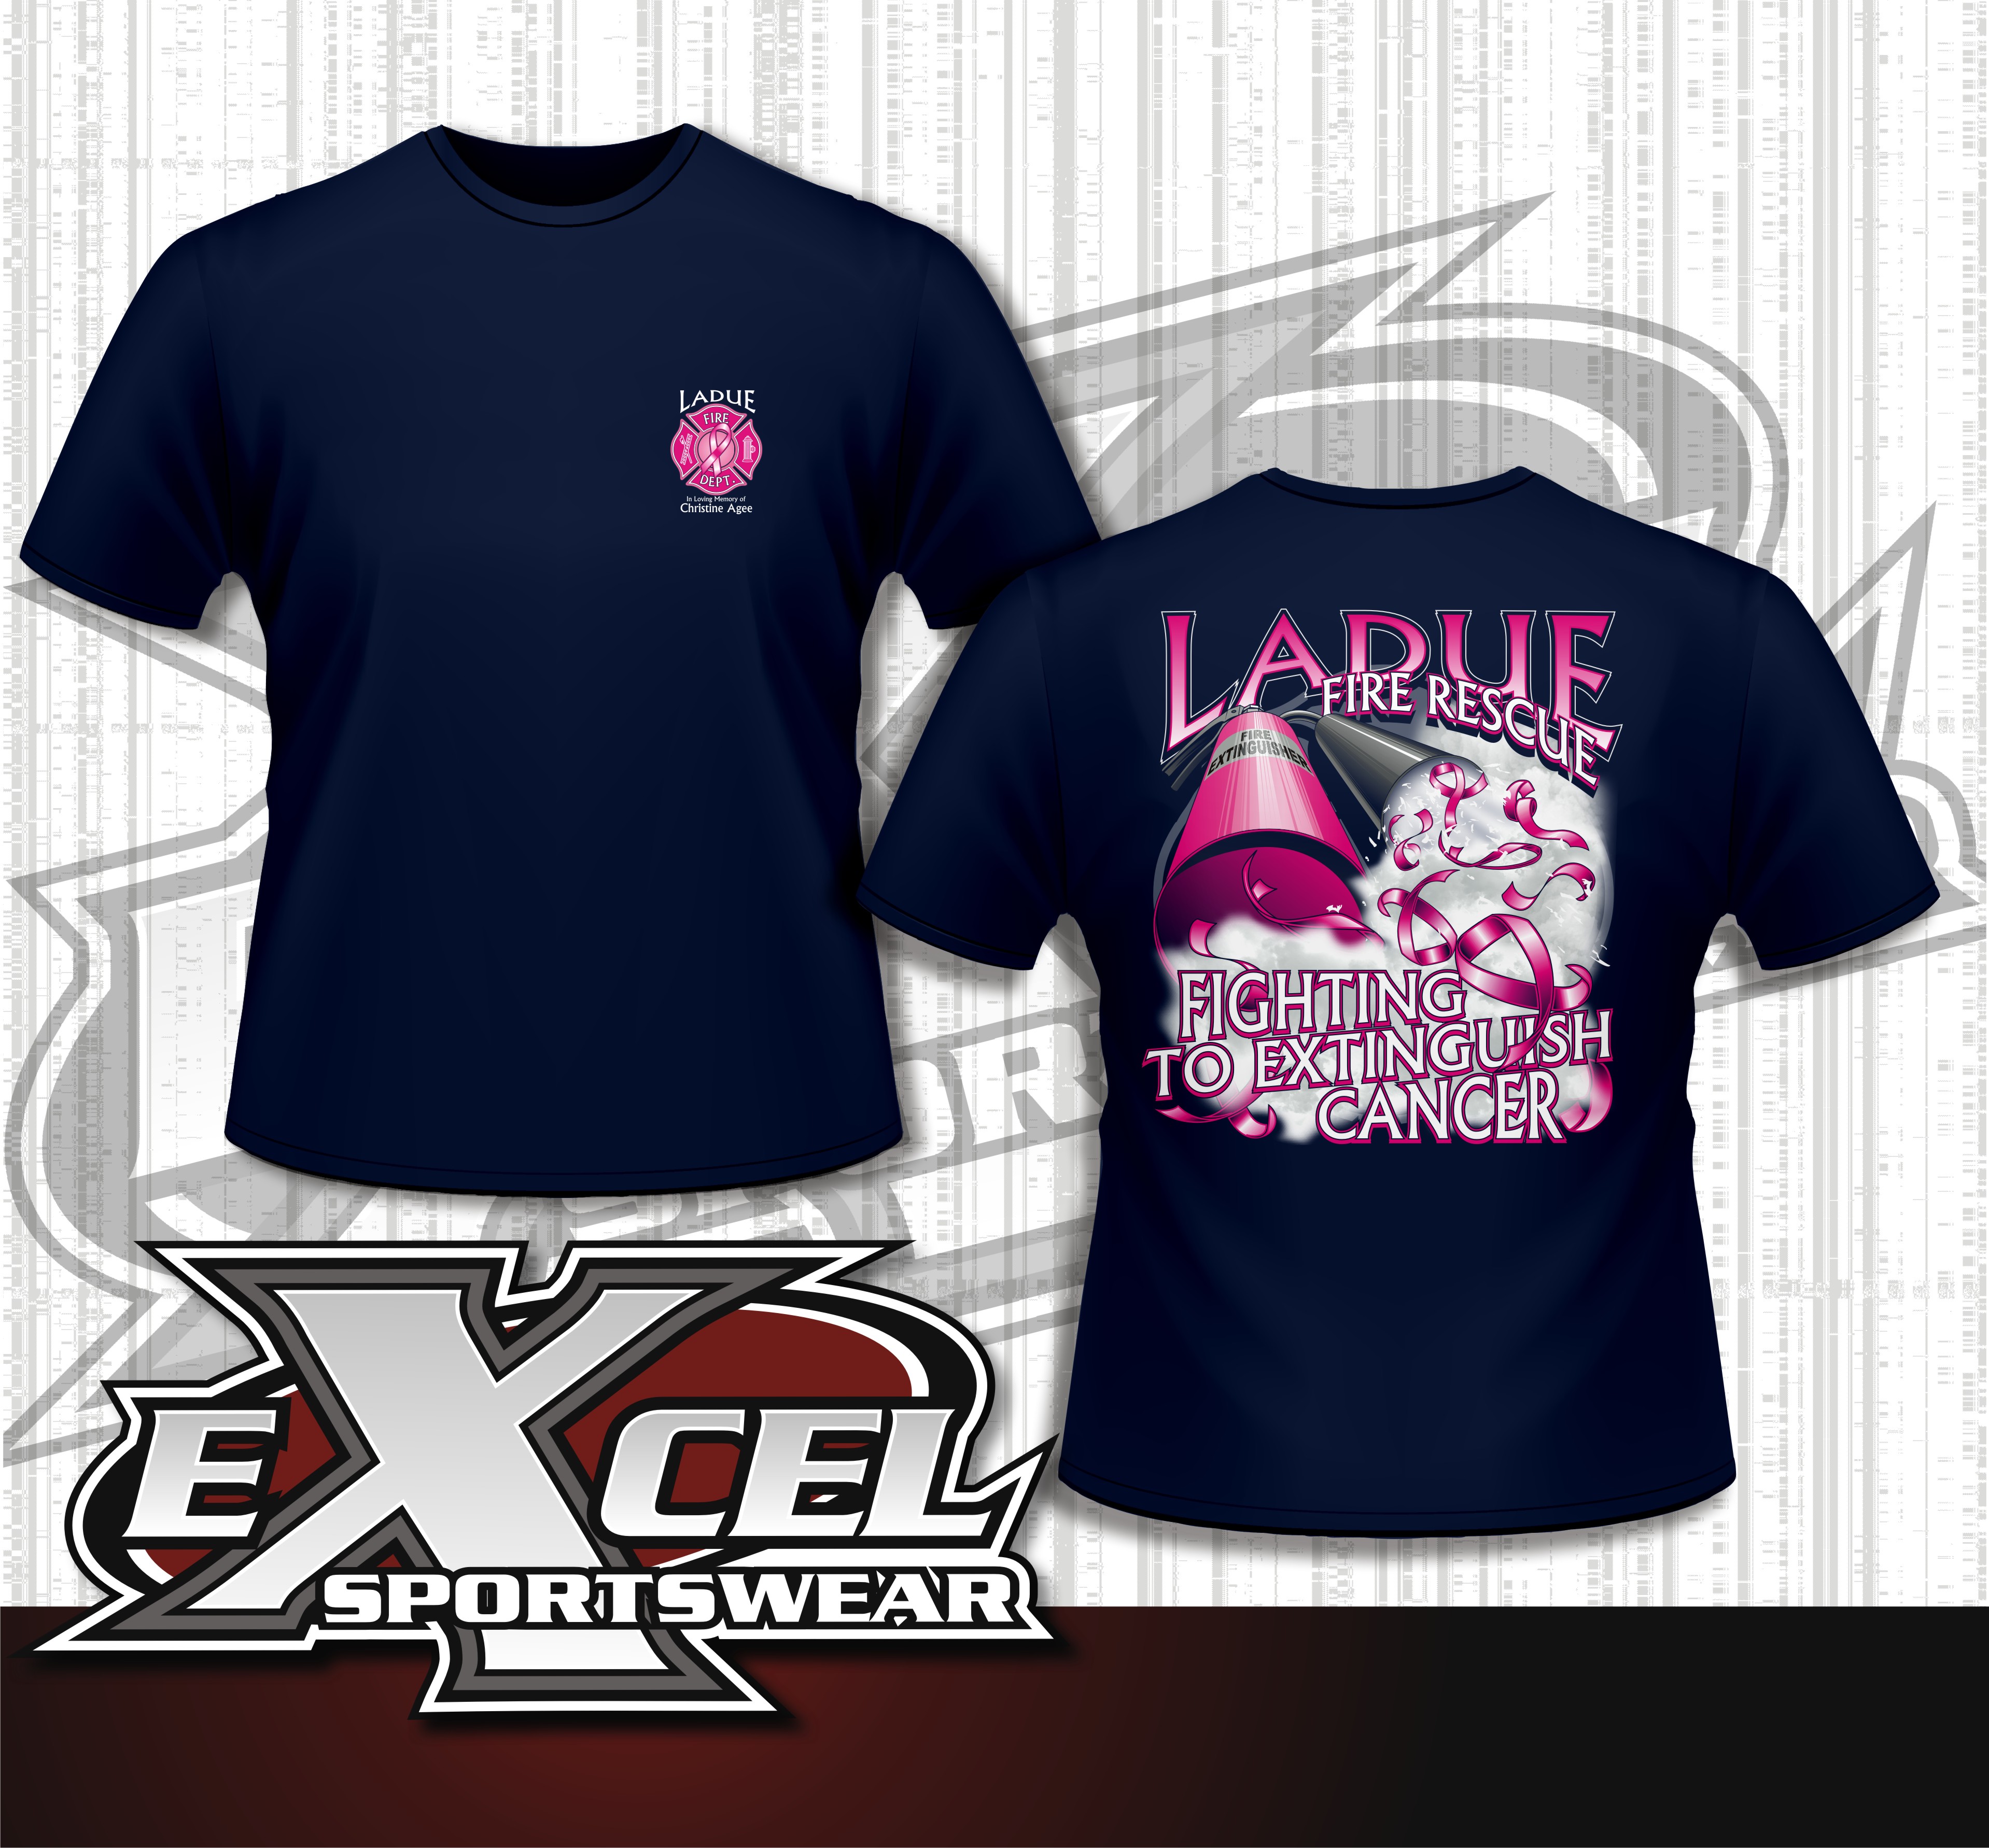 Excel Sportswear Help Fight Breast Cancer This Year,Satanic Cross Tattoo Designs